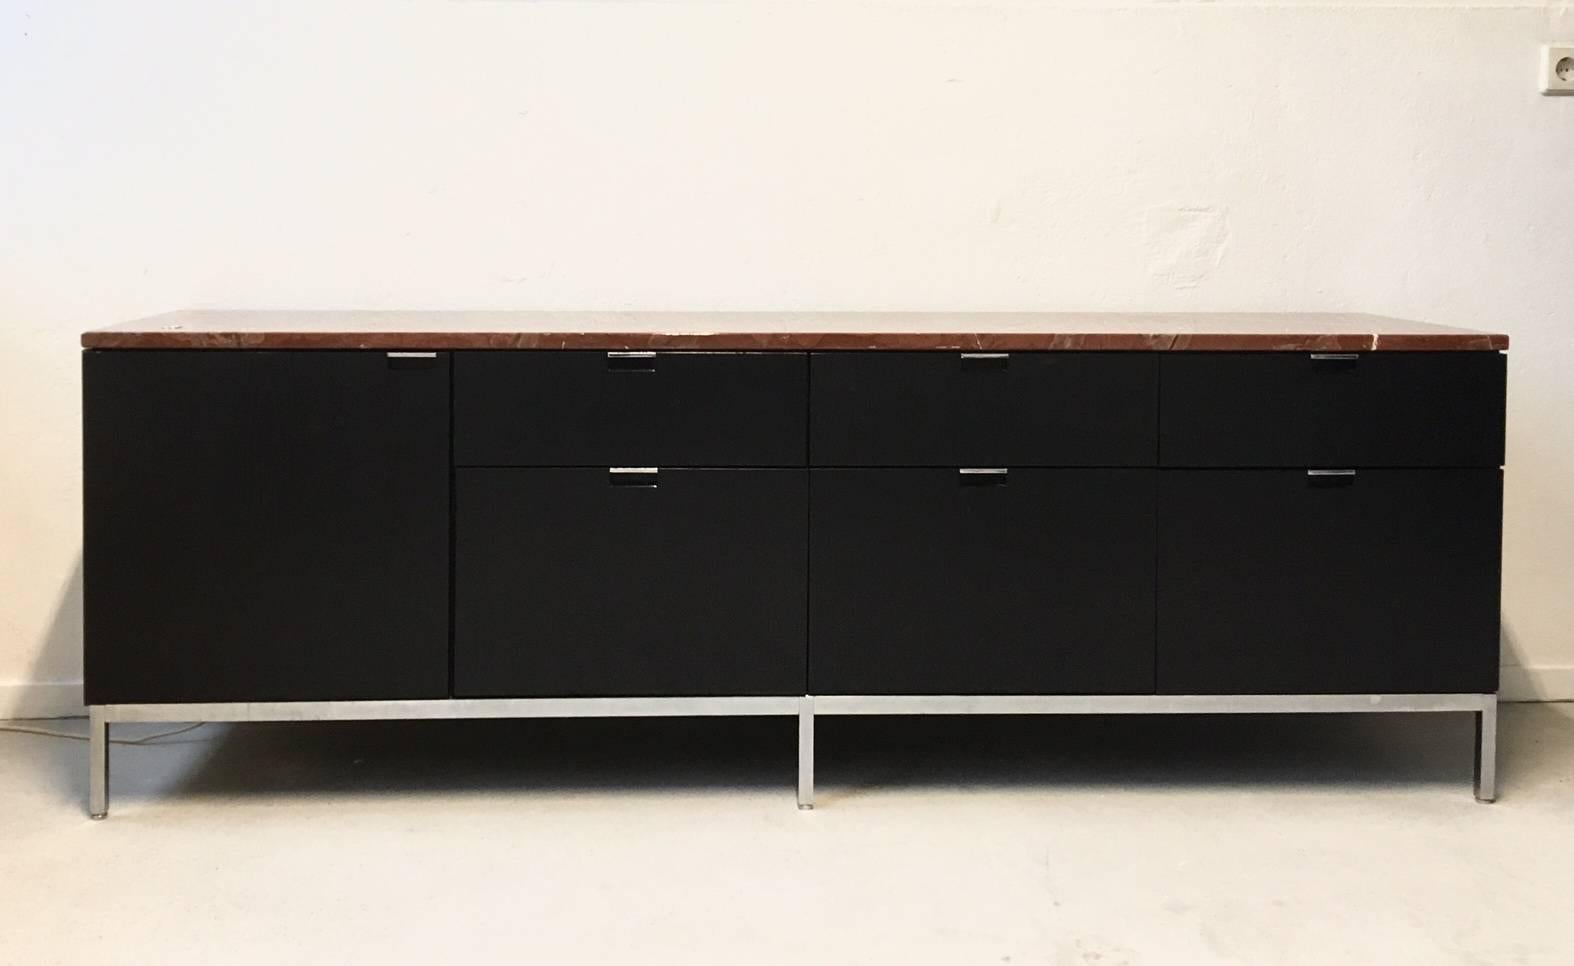 When Florence Knoll transformed the traditional private office configuration by replacing the executive desk with a table, she needed to provide an alternative to the lost storage space. Her solution was the Credenza. The low cabinet's iconic design